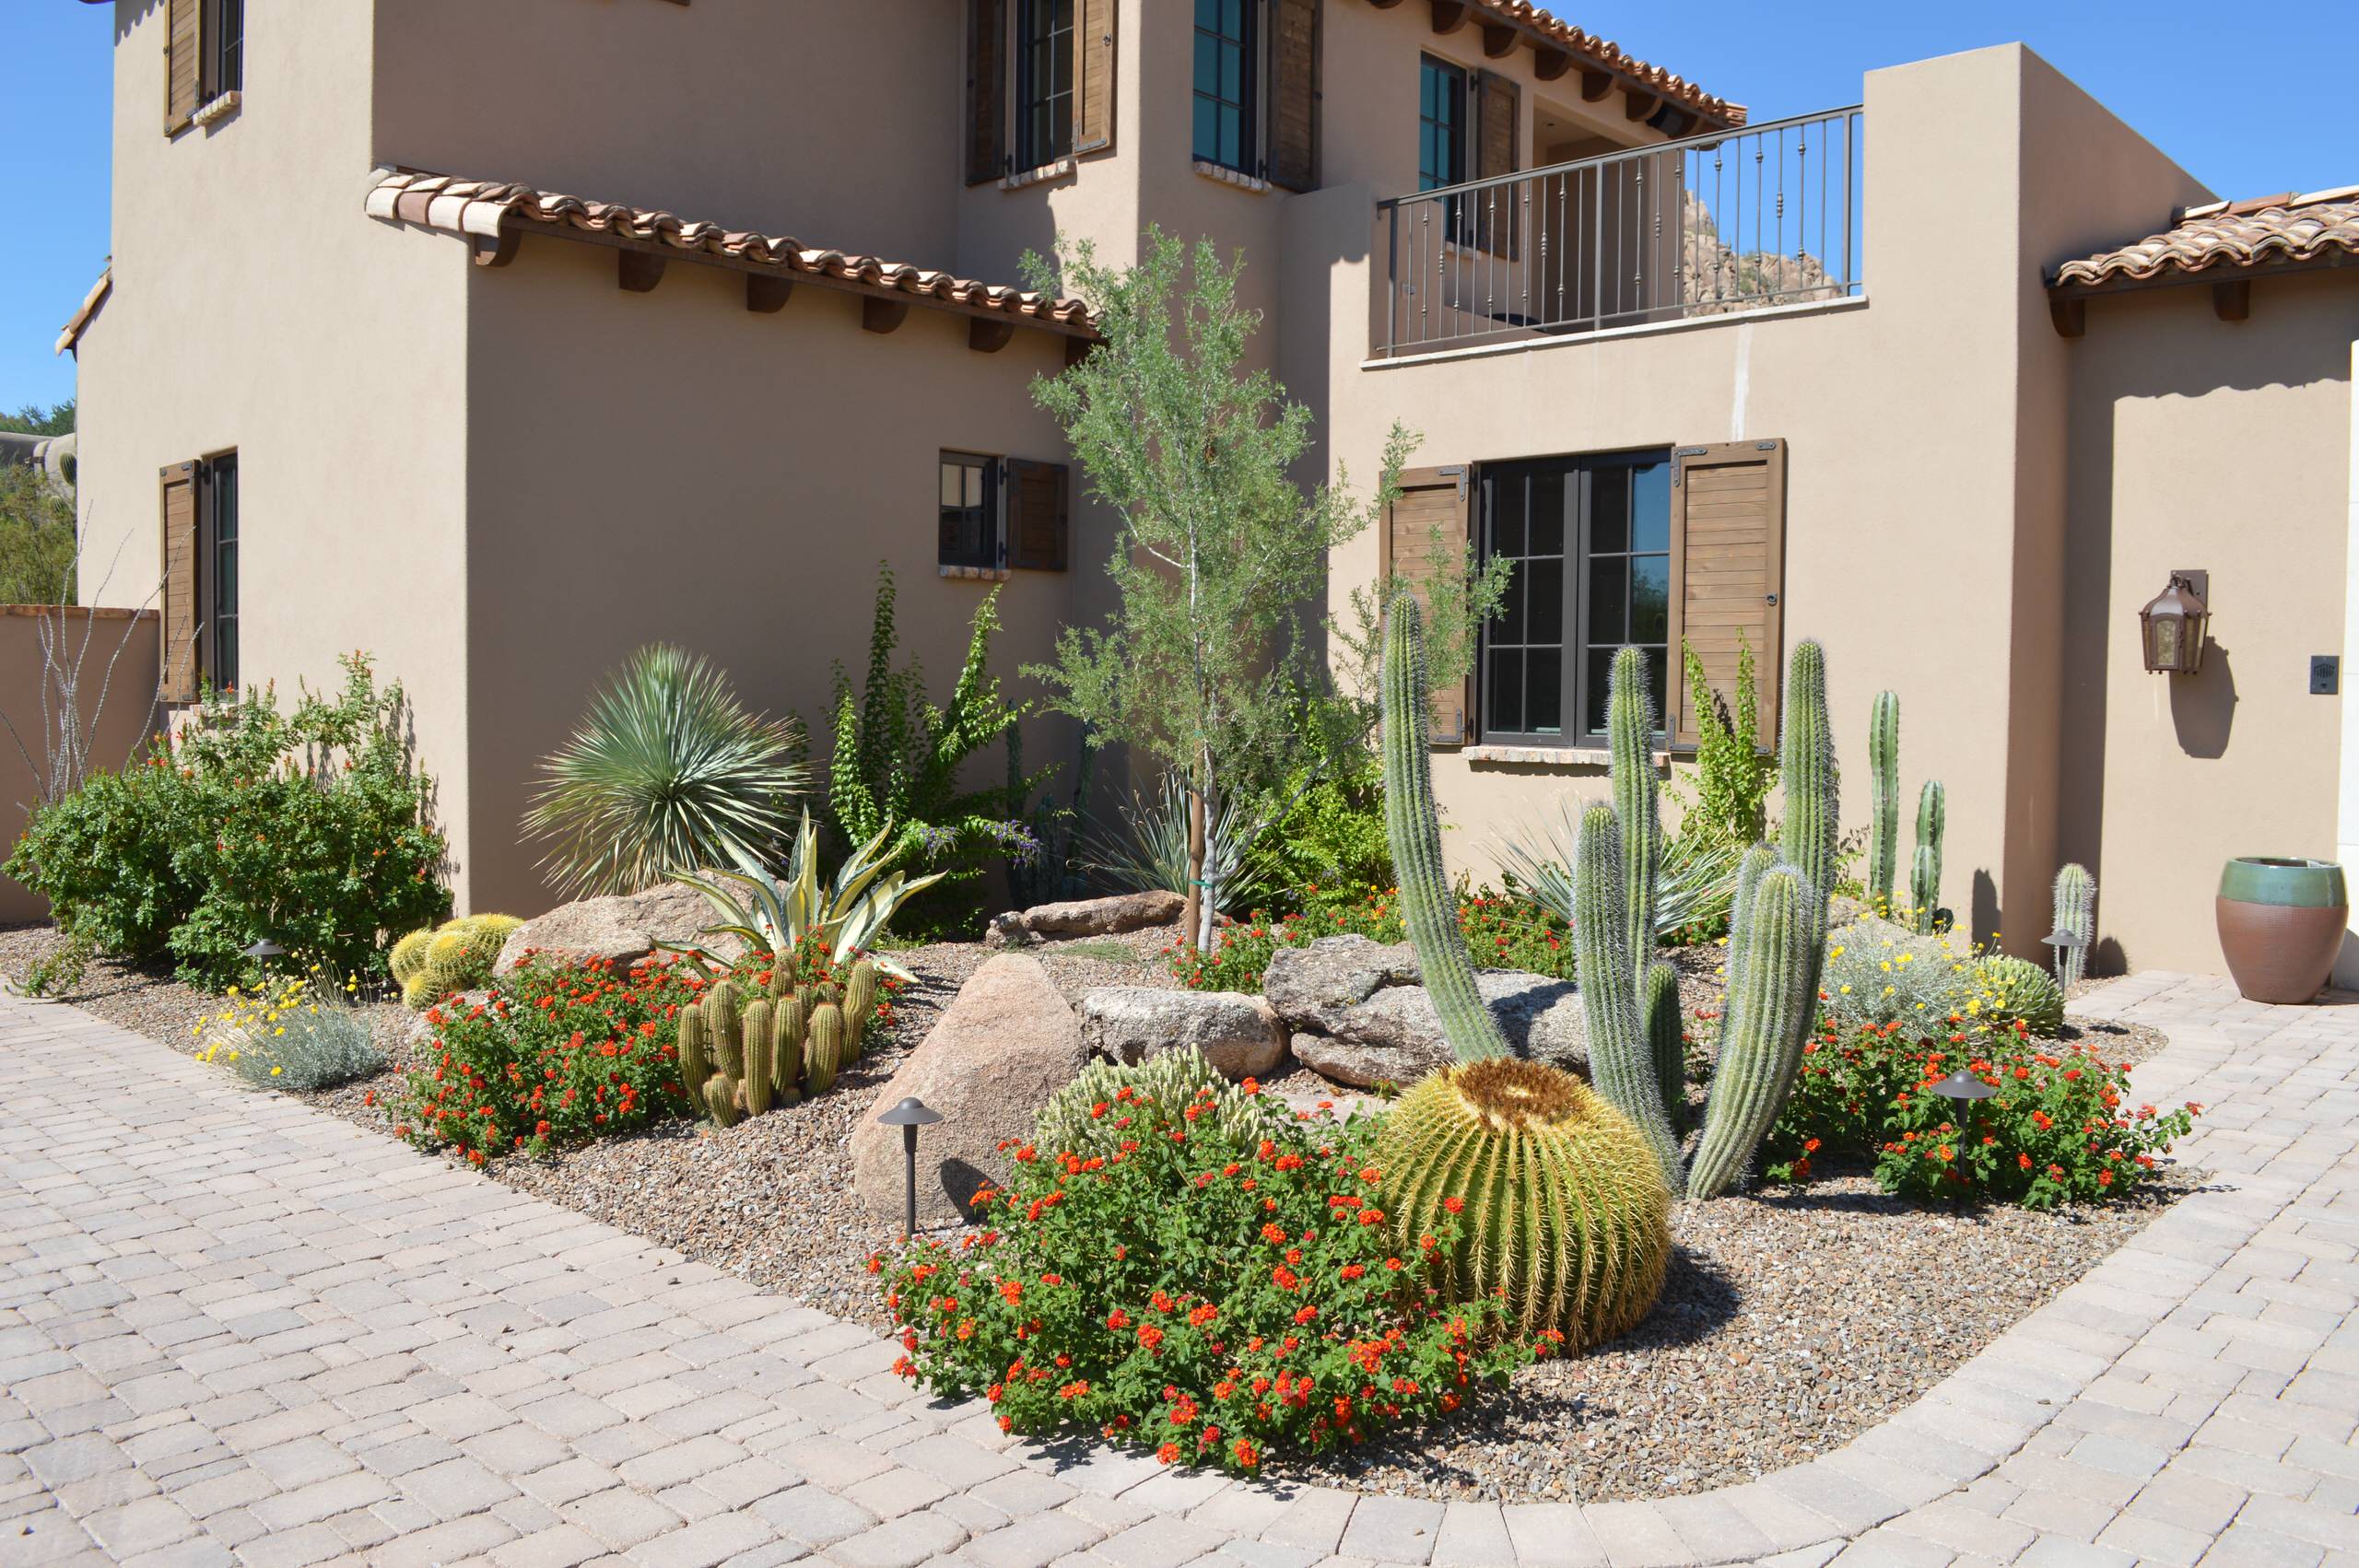  Desert Front Yard Landscaping Ideas You Ll Love March  Houzz - Front Yard Desert Landscaping Ideas Pictures